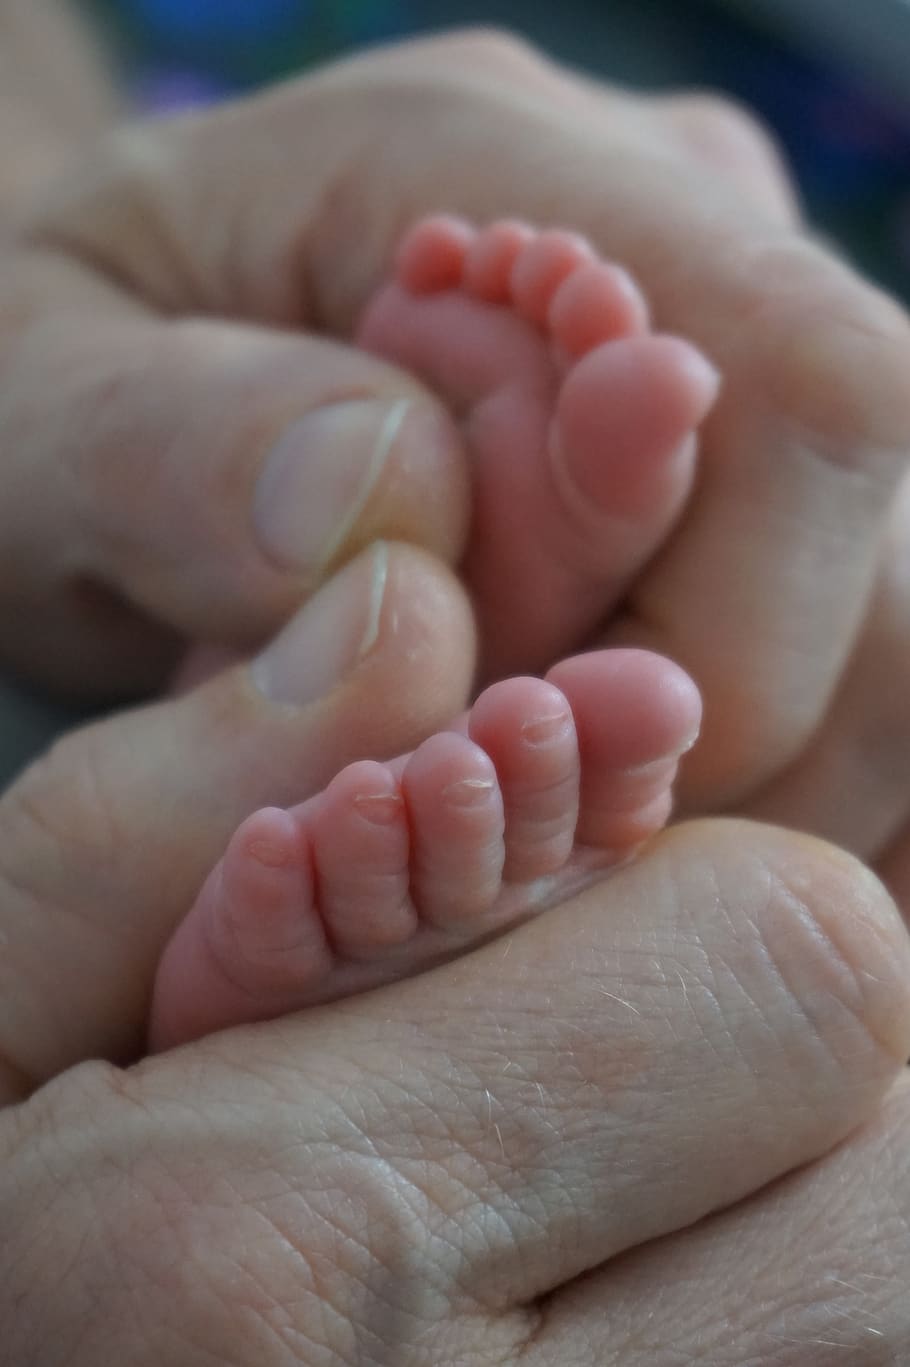 kinder, baby, baby feet, newborn, toes, baby toes, father, hands, human body part, body part